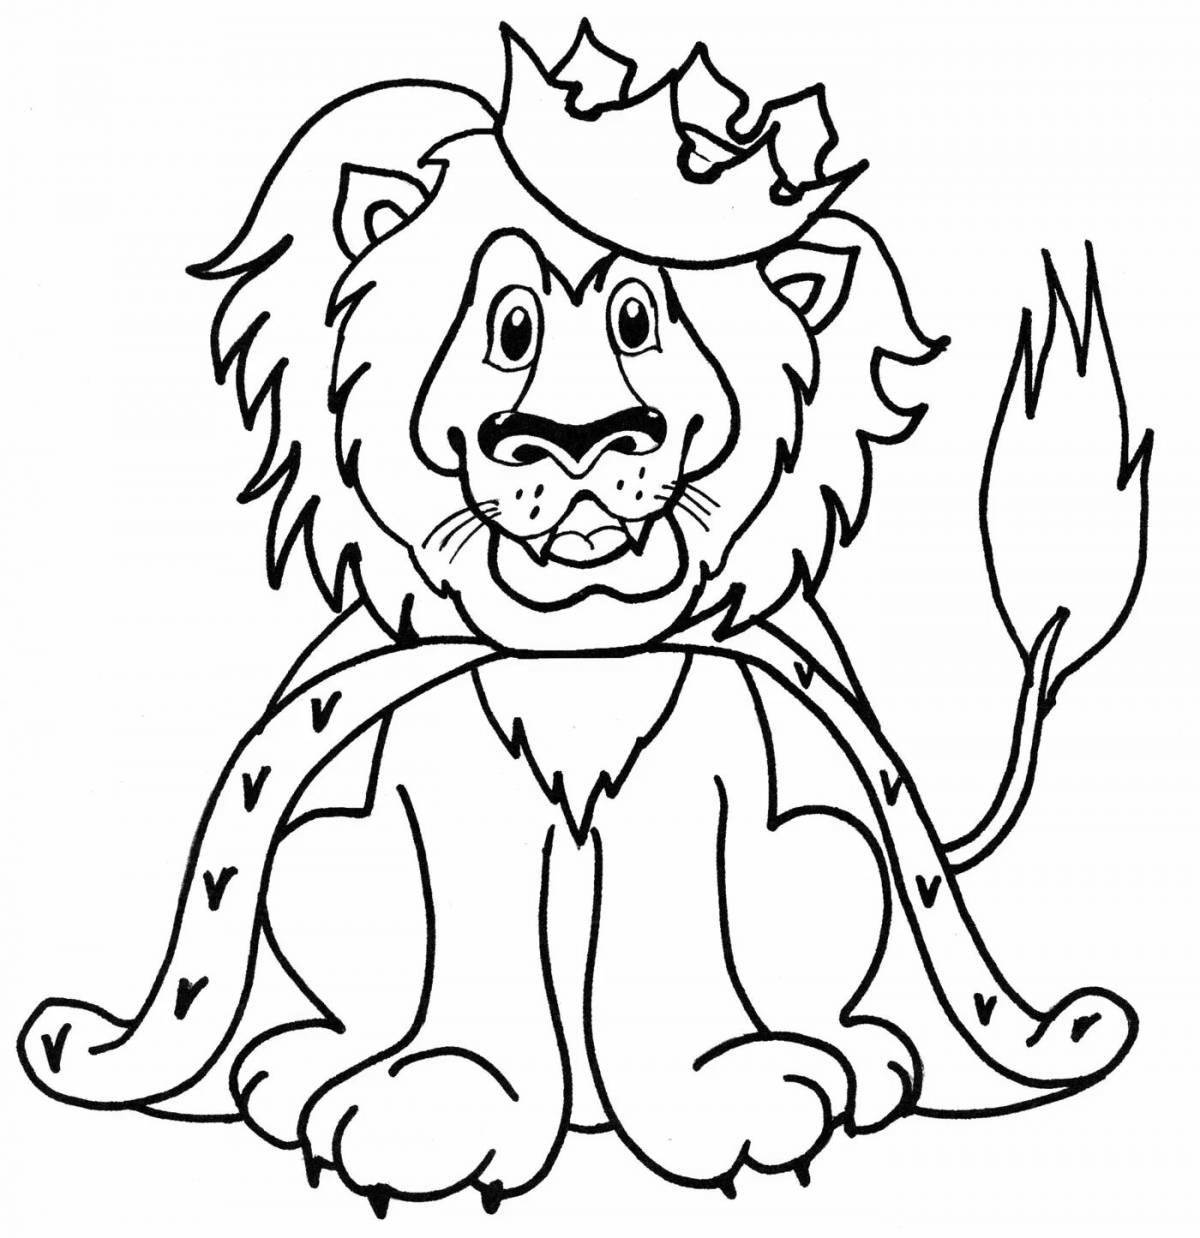 Awesome lion coloring page